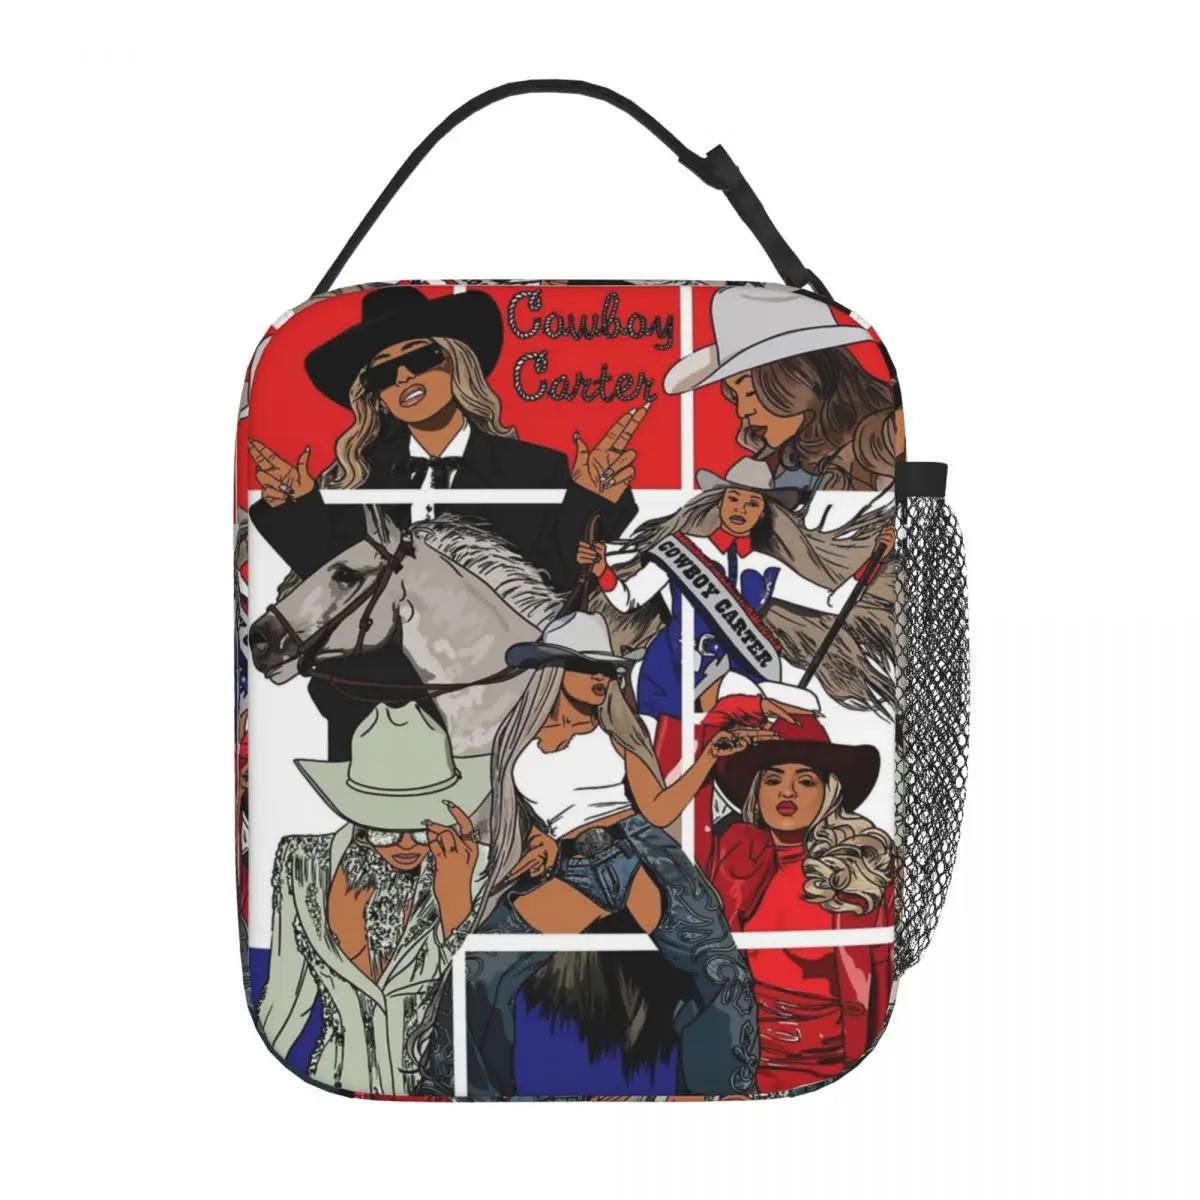 

Cowboy Carter Beyonce New Album Merch Insulated Lunch Tote Bag For School Food Storage Bag Portable Cooler Thermal Lunch Boxes